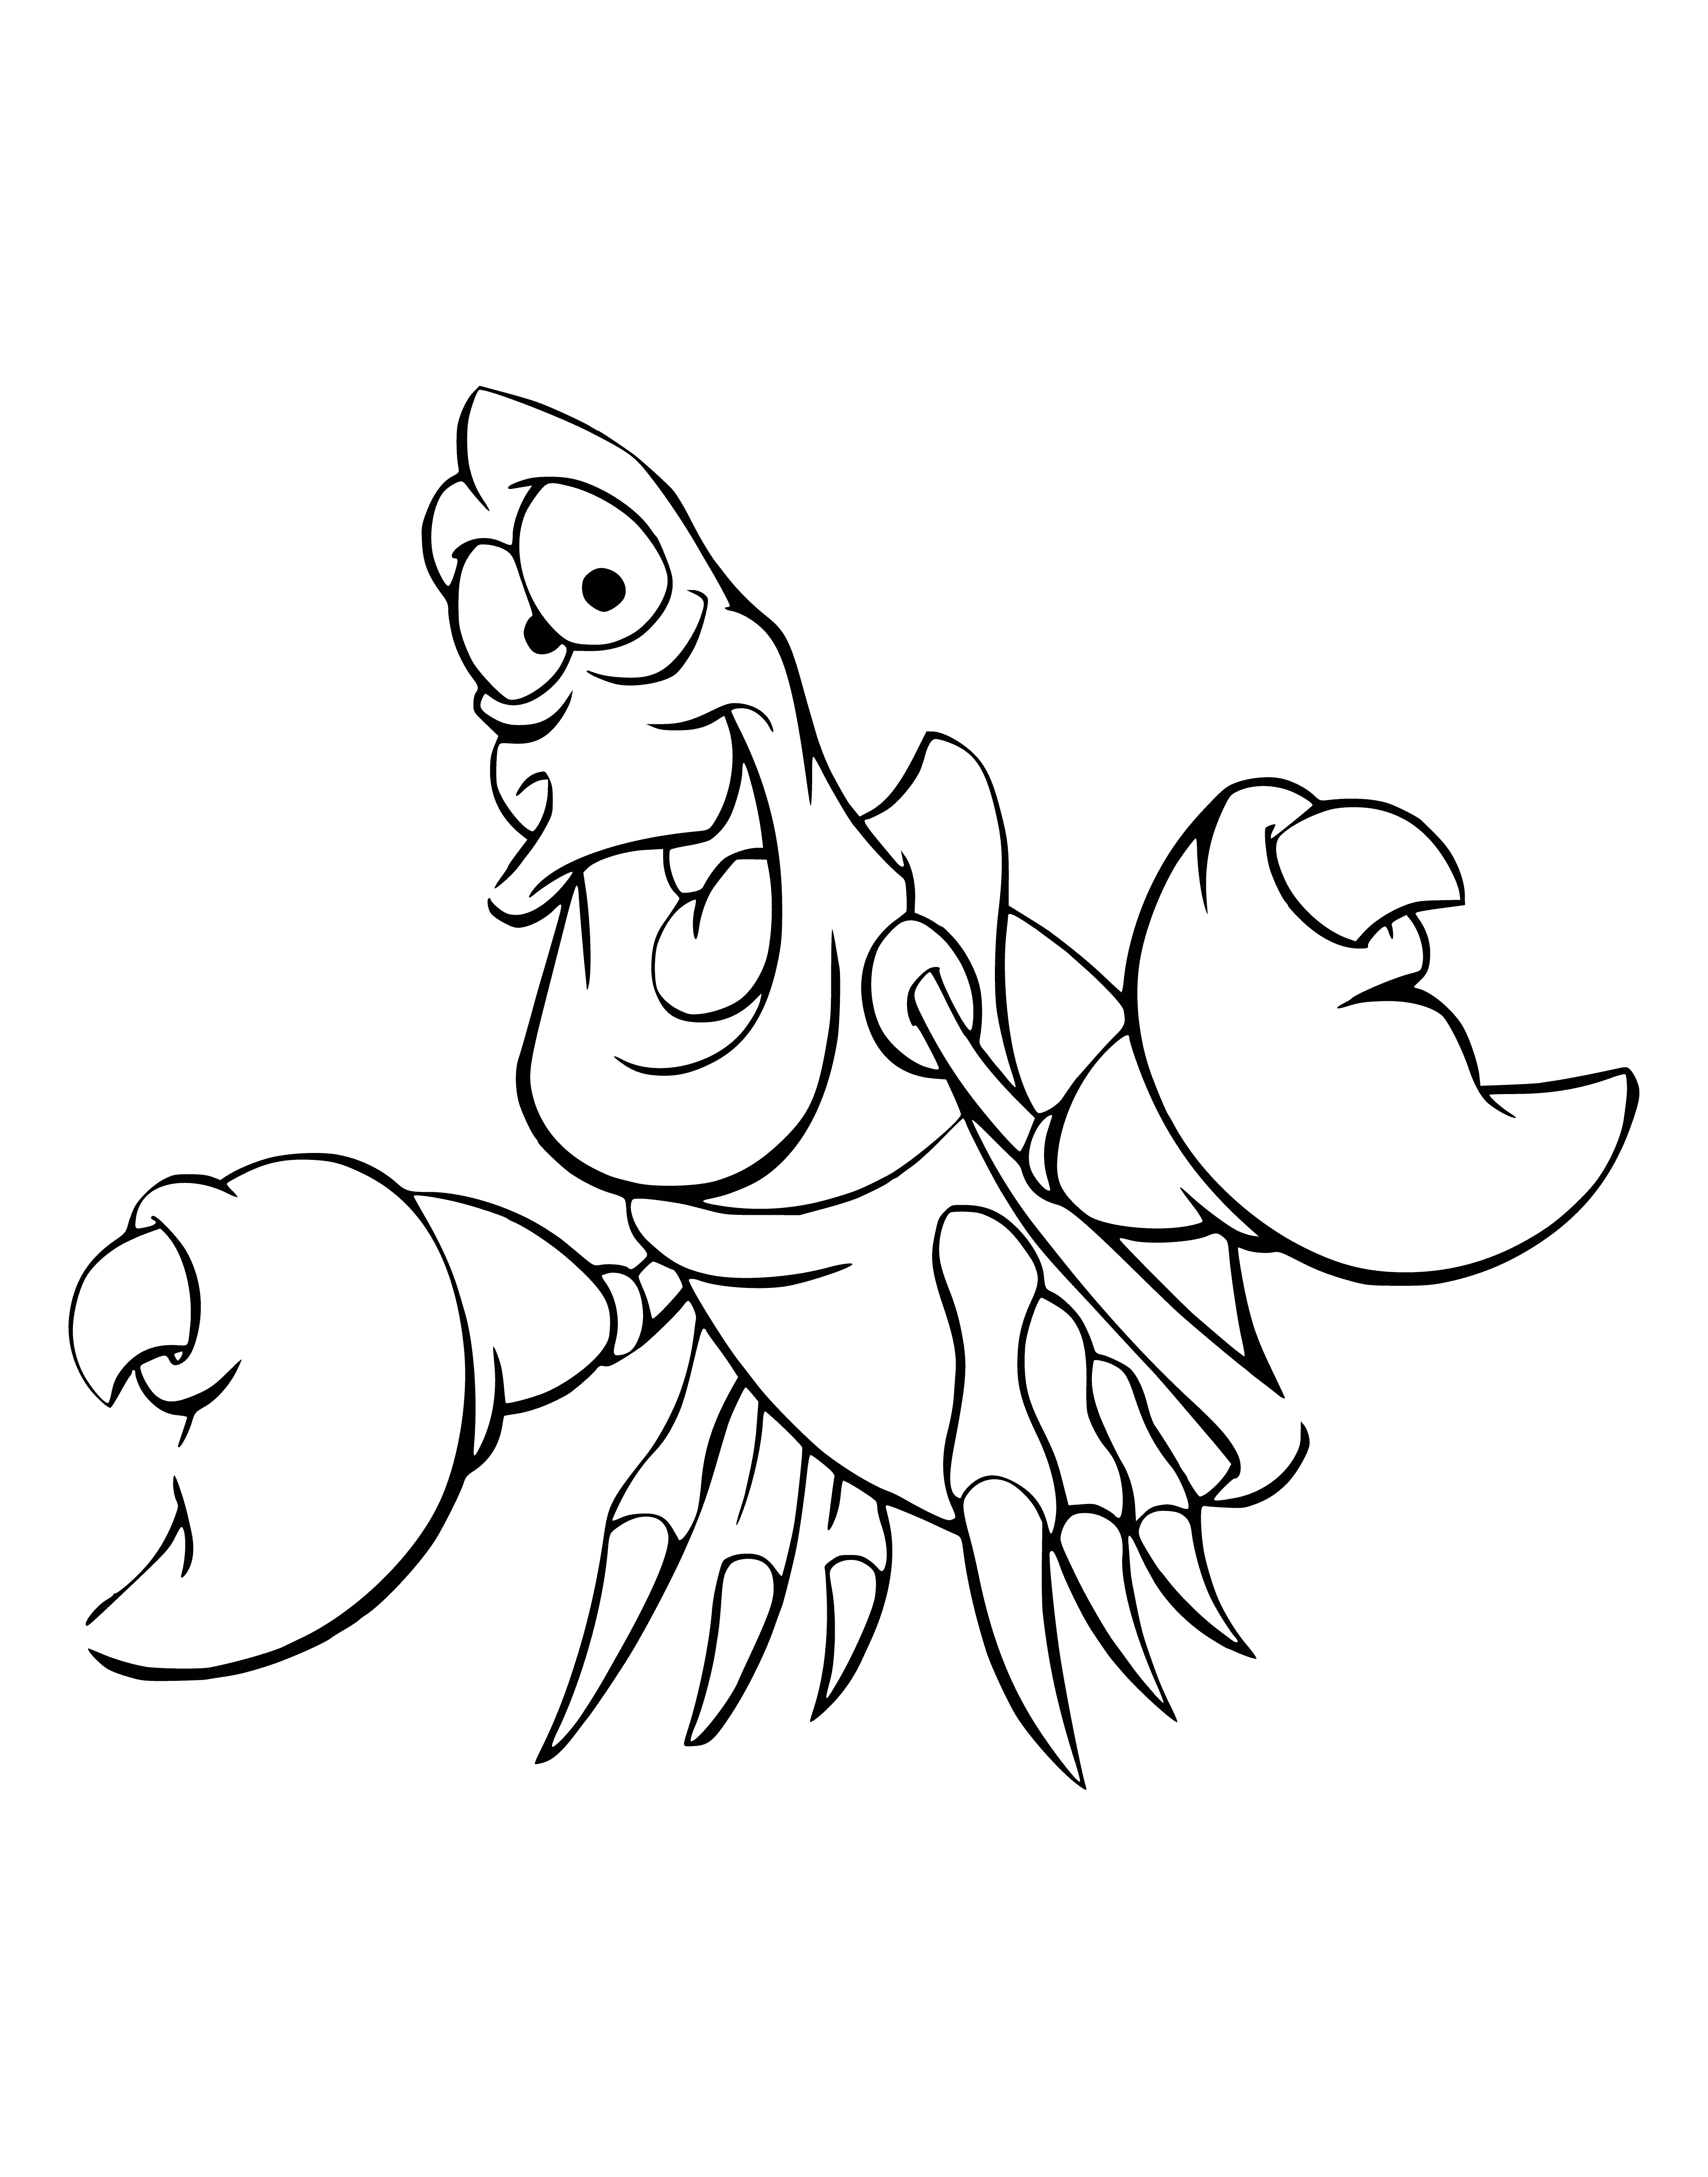 coloring page: Small crab perched on a rock in the ocean looking up happily with two large claws and a dark brown shell. #crabs